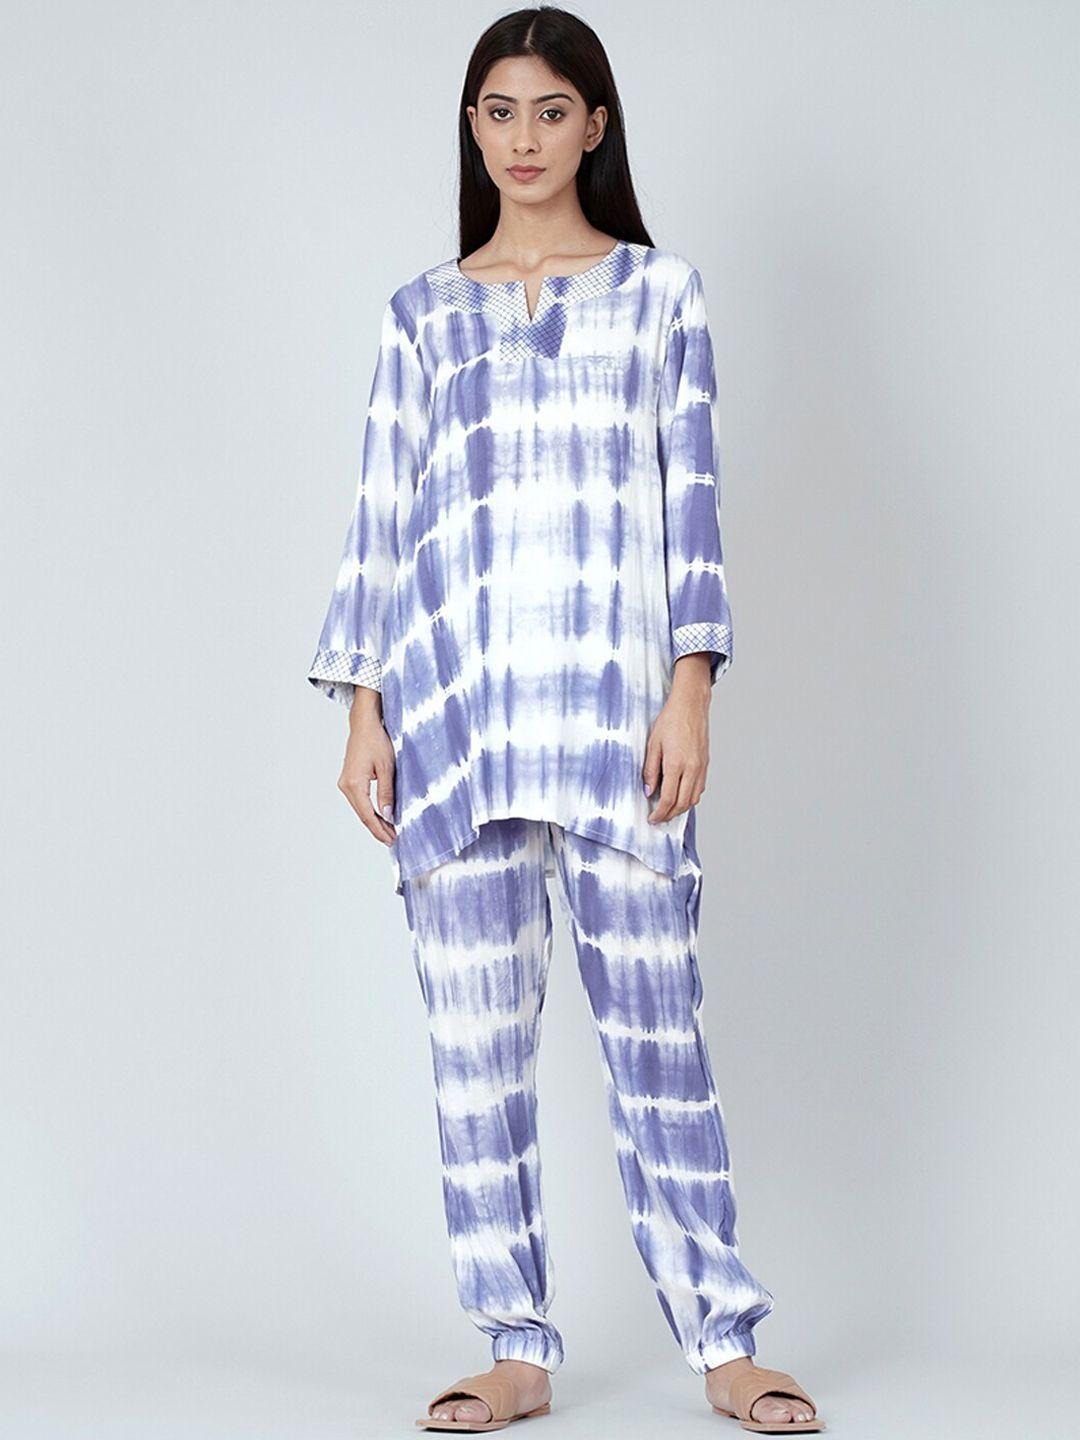 first resort by ramola bachchan women tie and dyed night suit